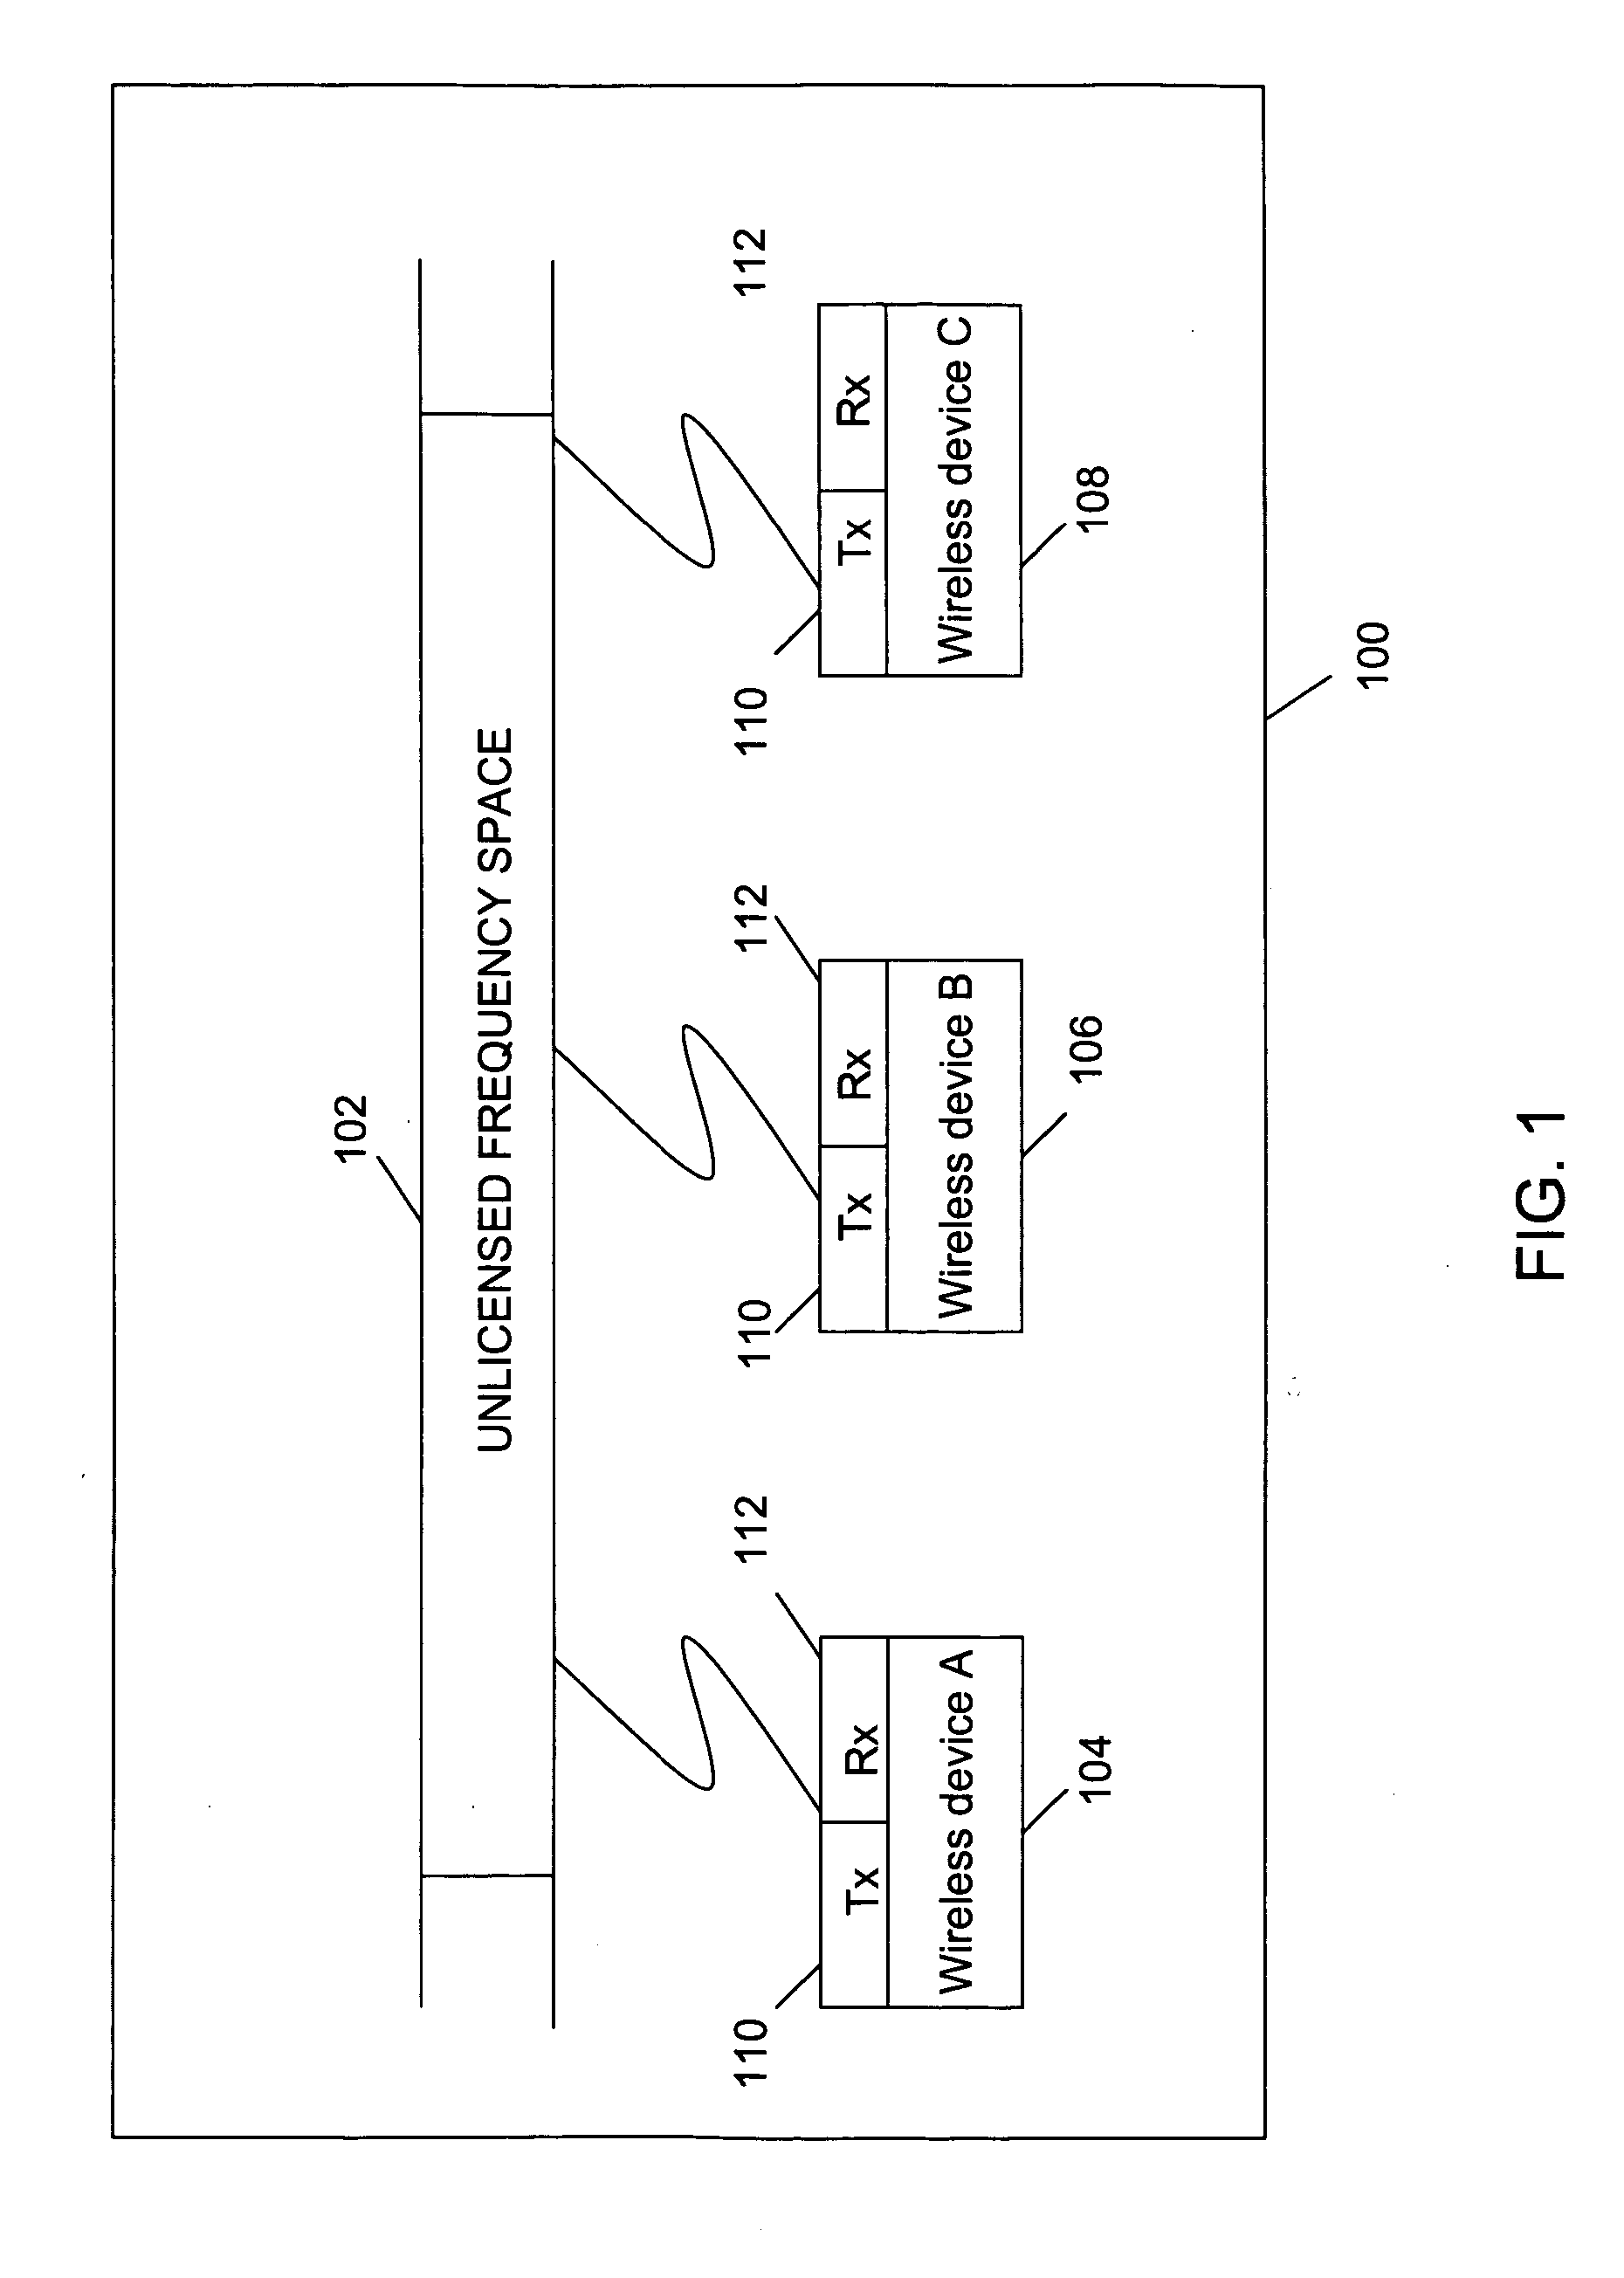 Method and system for coordinating radio resources in unlicensed frequency bands